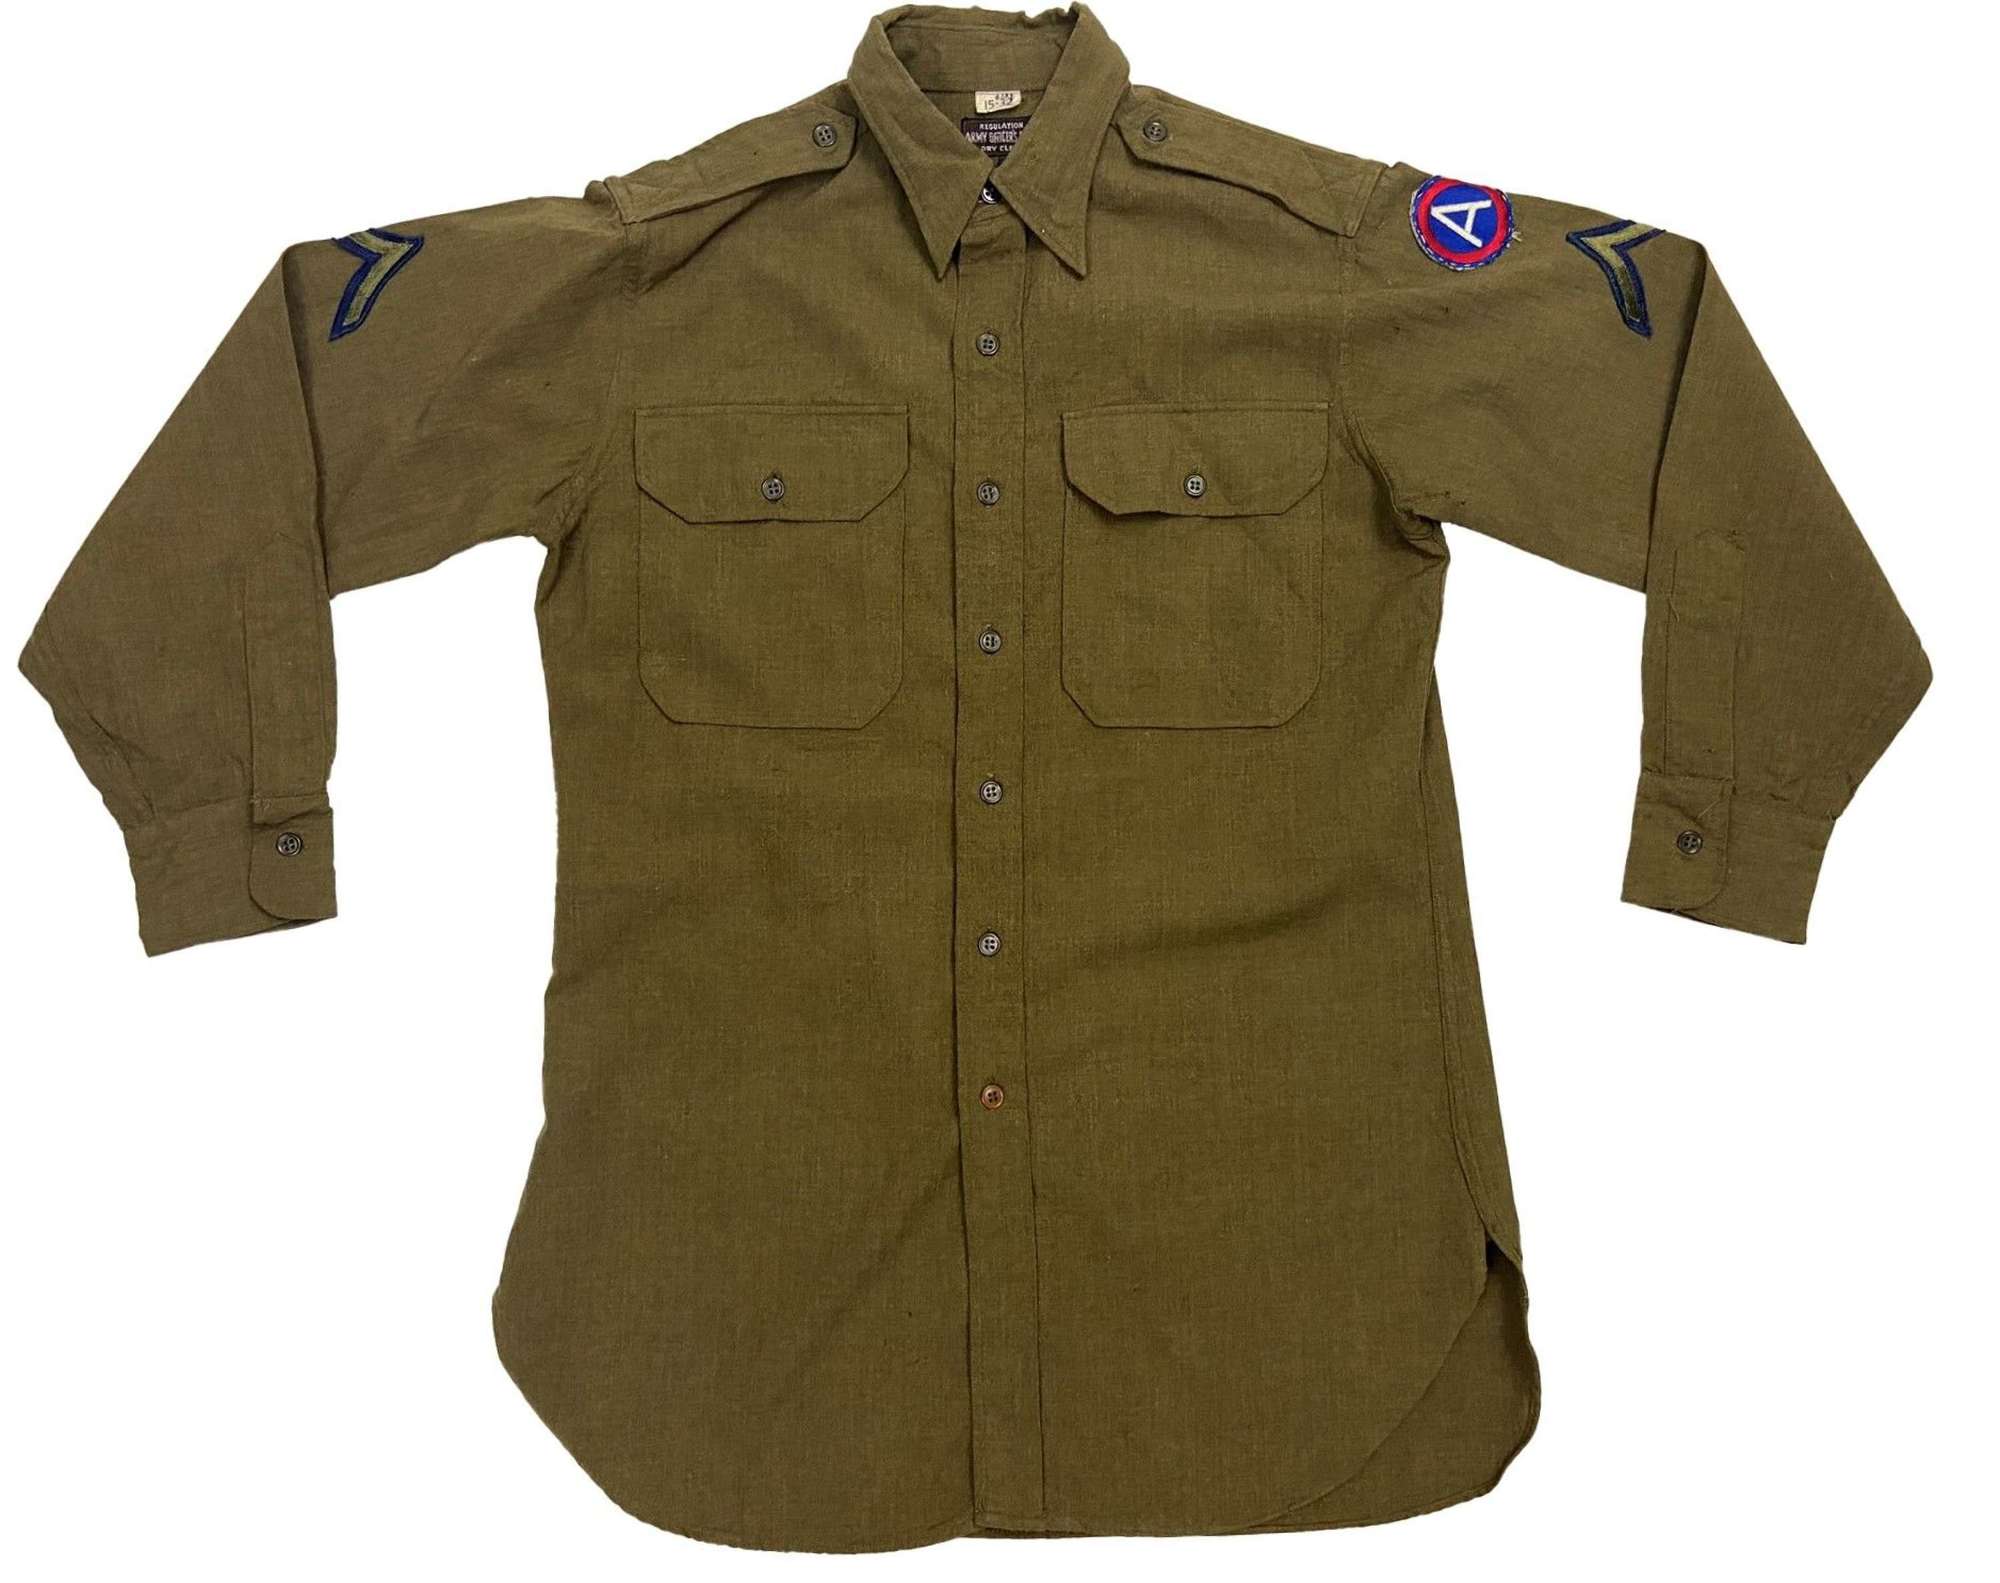 Original WW2 Period United States Officers Shirt - Private first Class